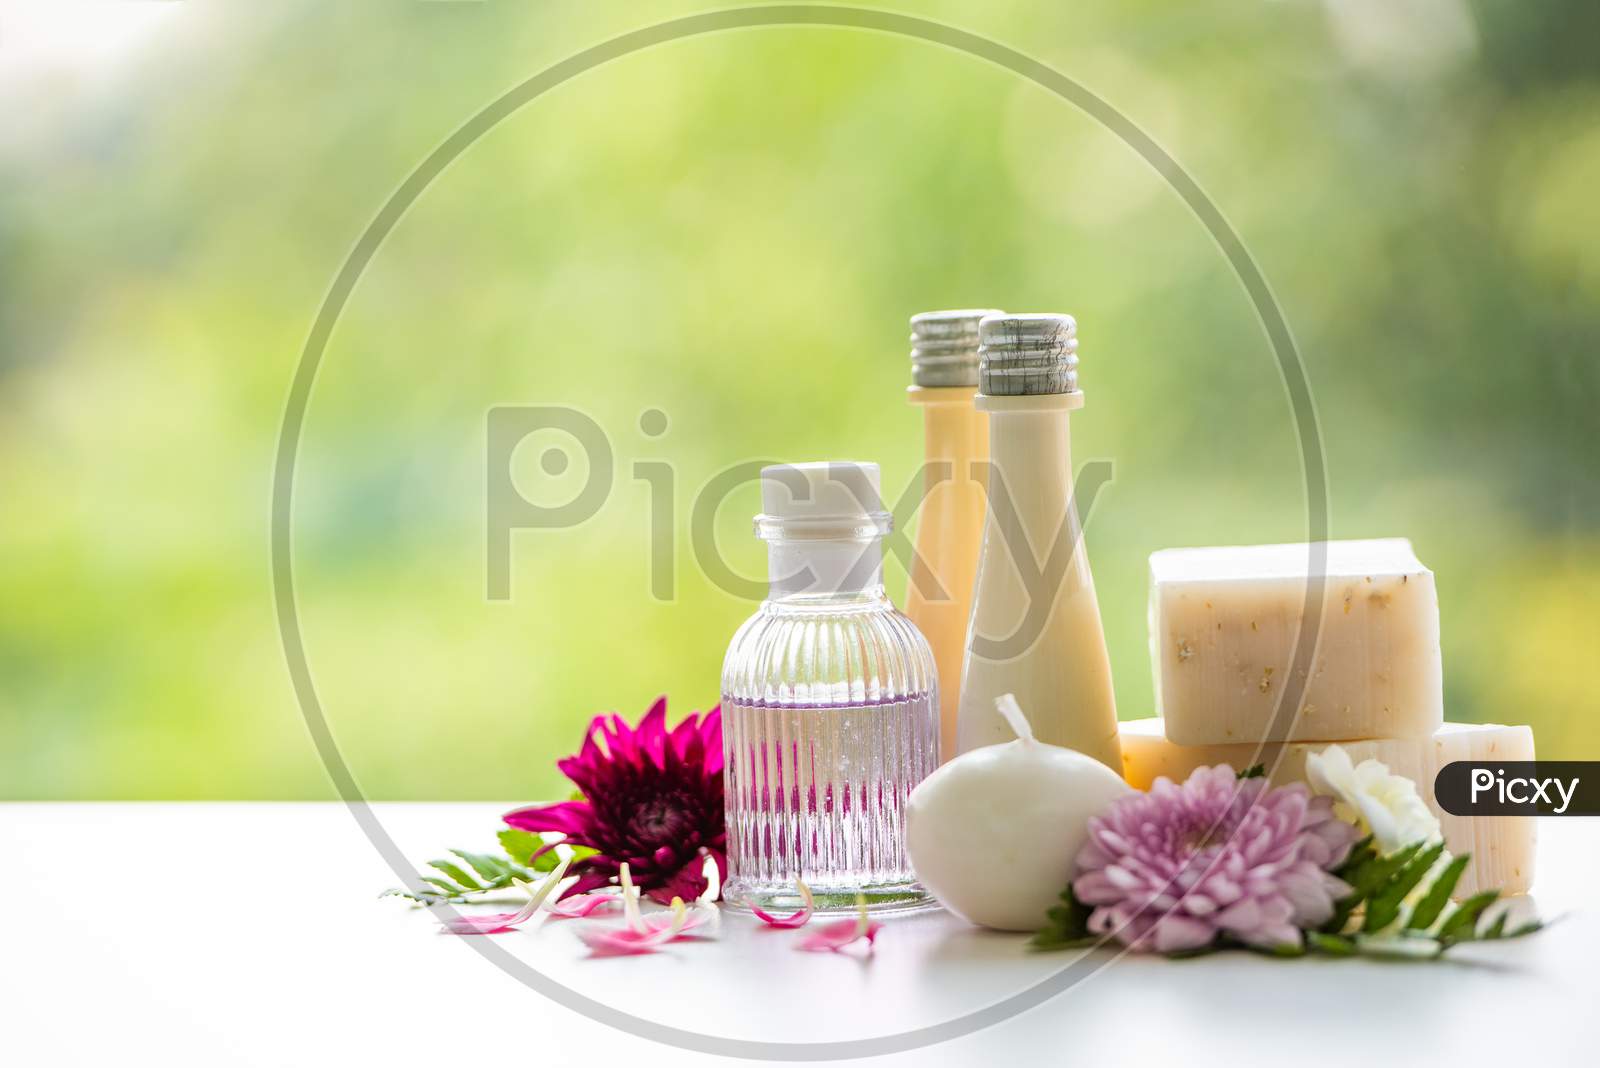 Floral Spa Treatments On White Wooden Table. Healthcare And Body Therapy Massage Relaxation Concept. Beauty And Healthy Theme. Pure Natural Extract And Medical Theme.